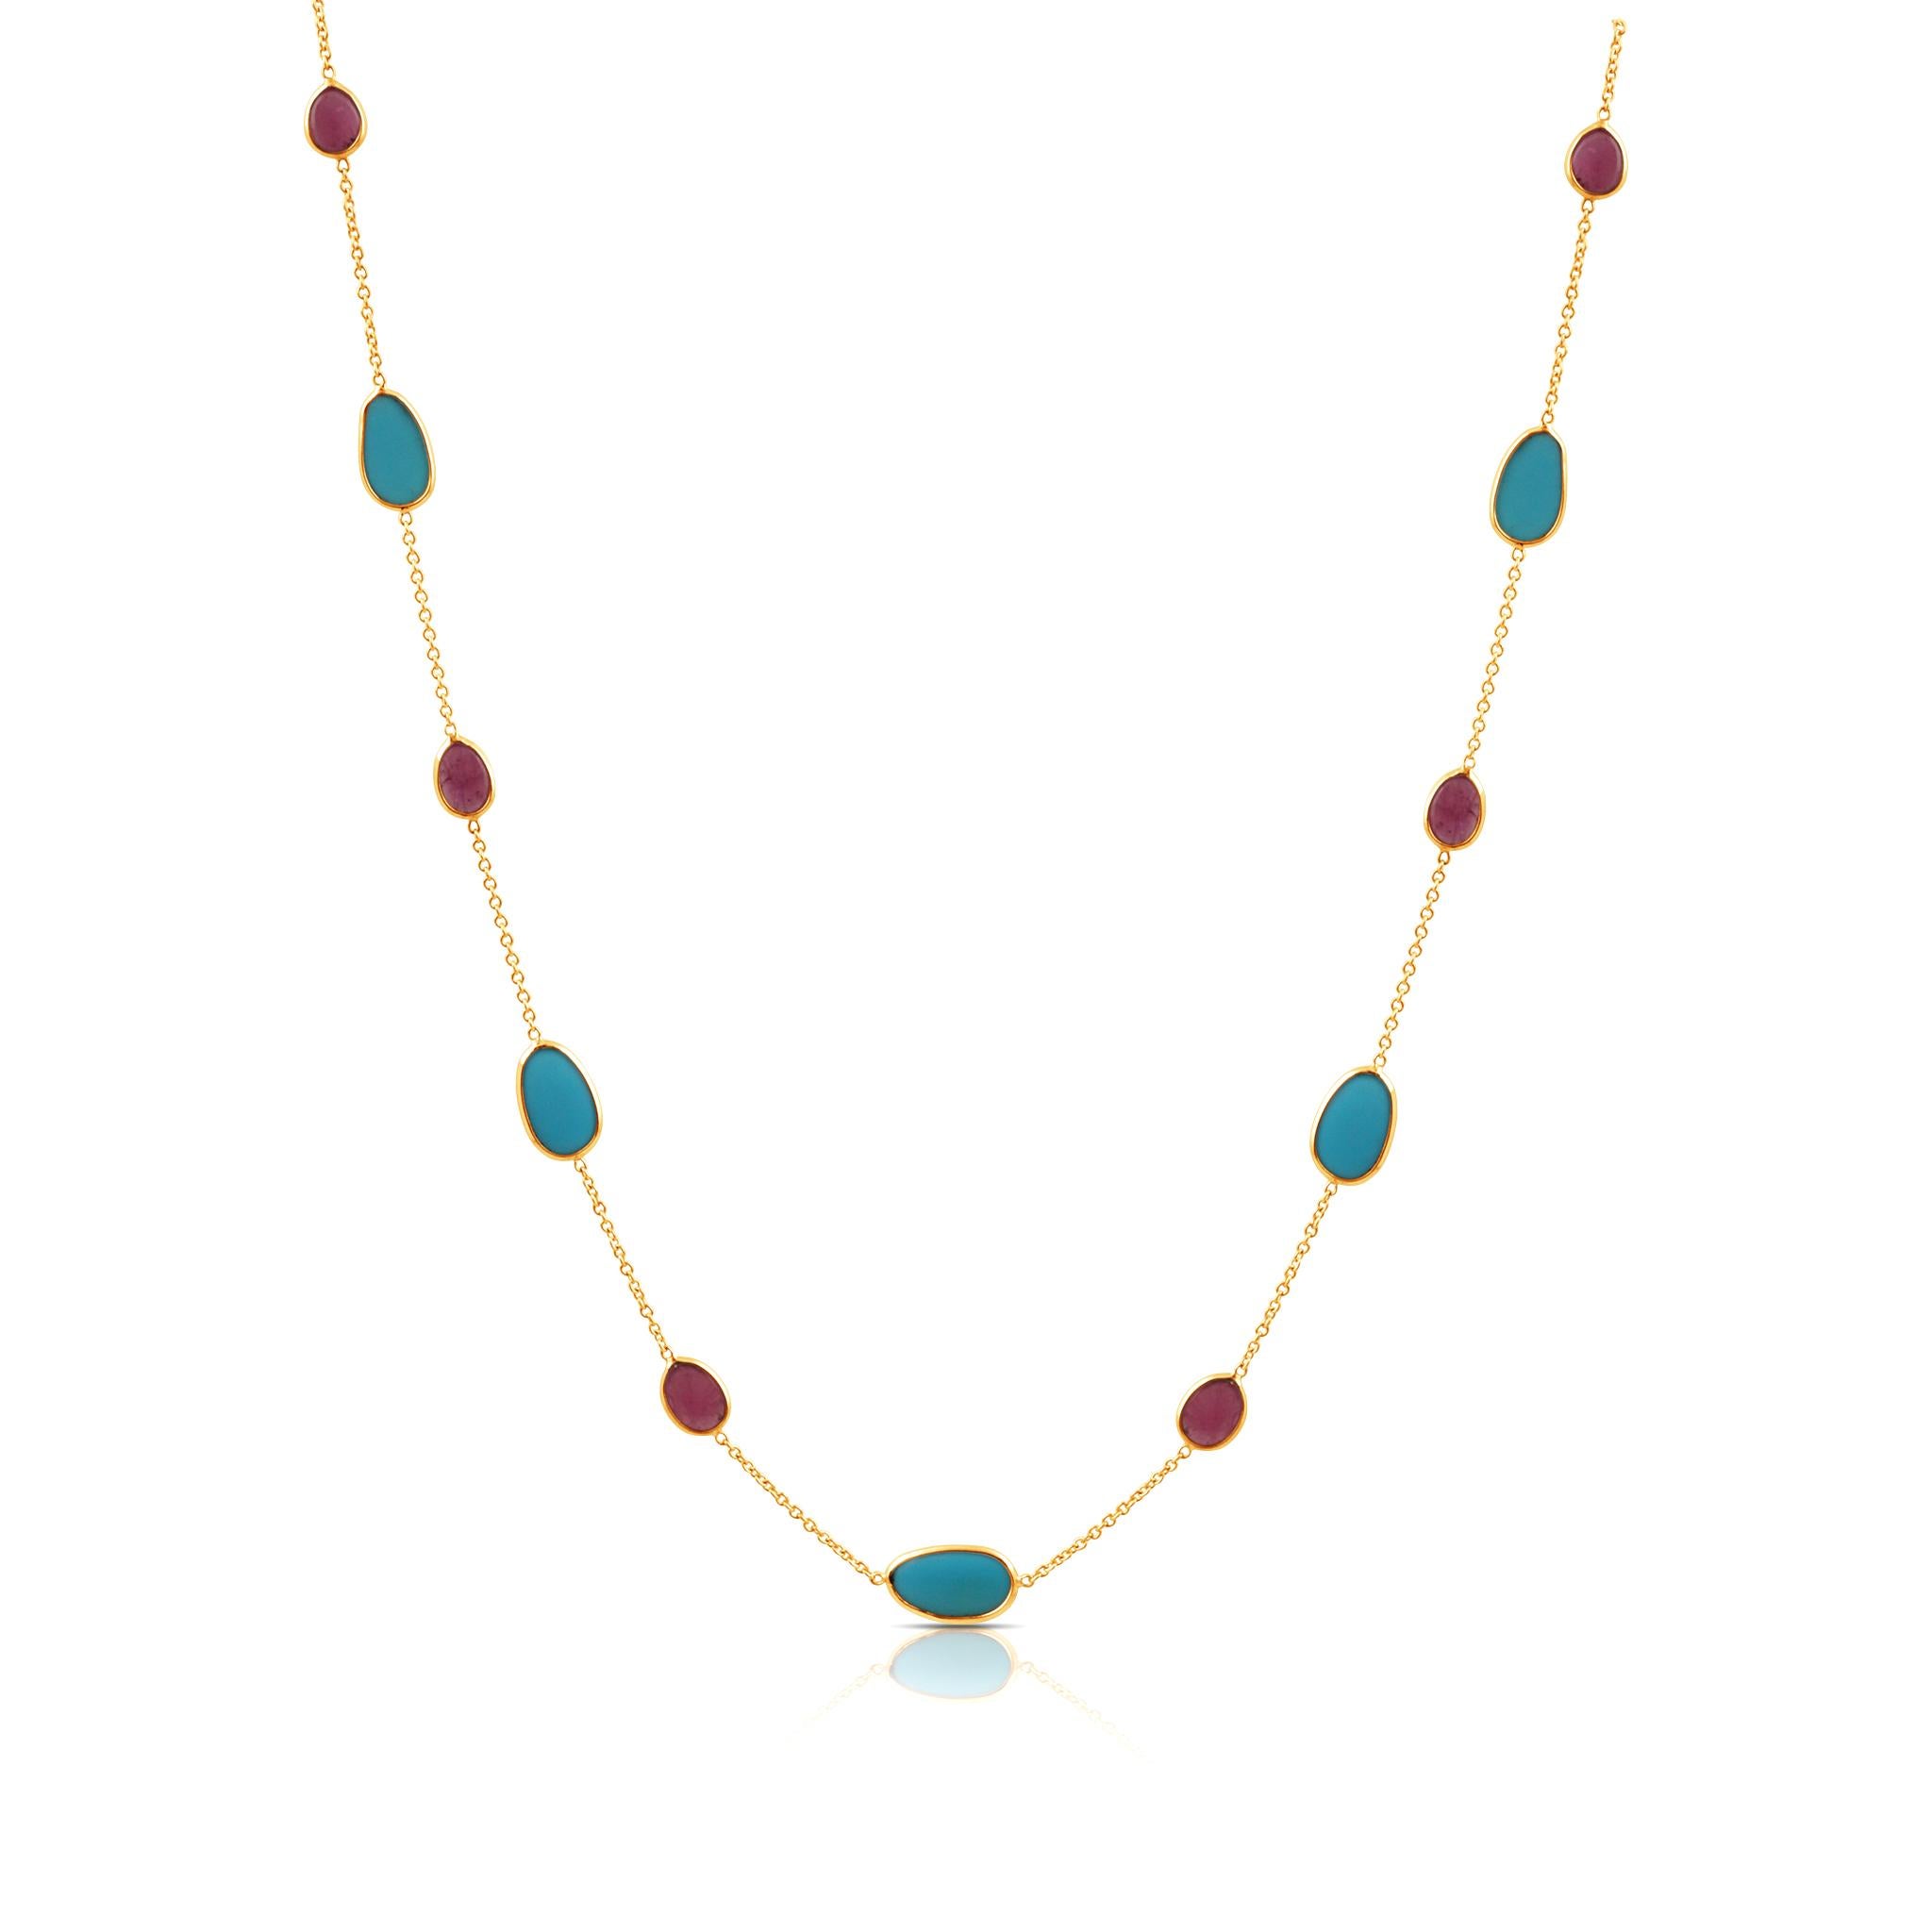 Tresor Beautiful Necklace features 8.21 carats of Gemstone. The Necklace are an ode to the luxurious yet classic beauty with sparkly gemstones and feminine hues. Their contemporary and modern design make them versatile in their use. The Necklace are